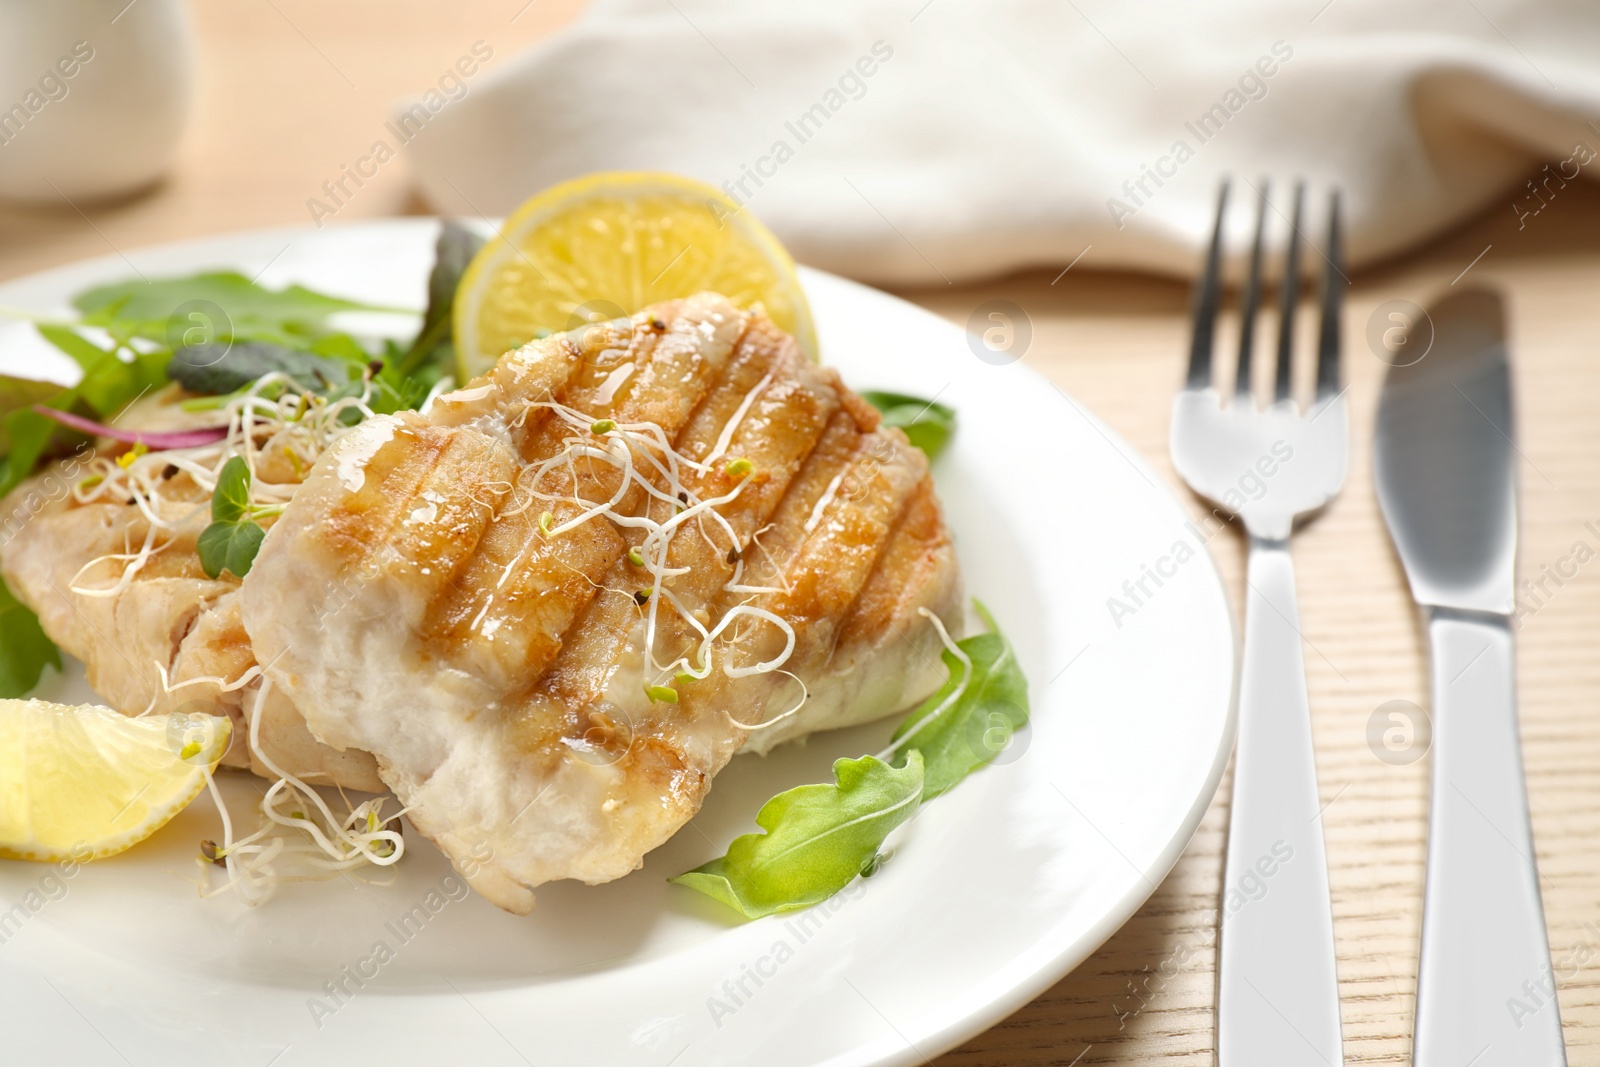 Photo of Tasty grilled fish served on wooden table, closeup